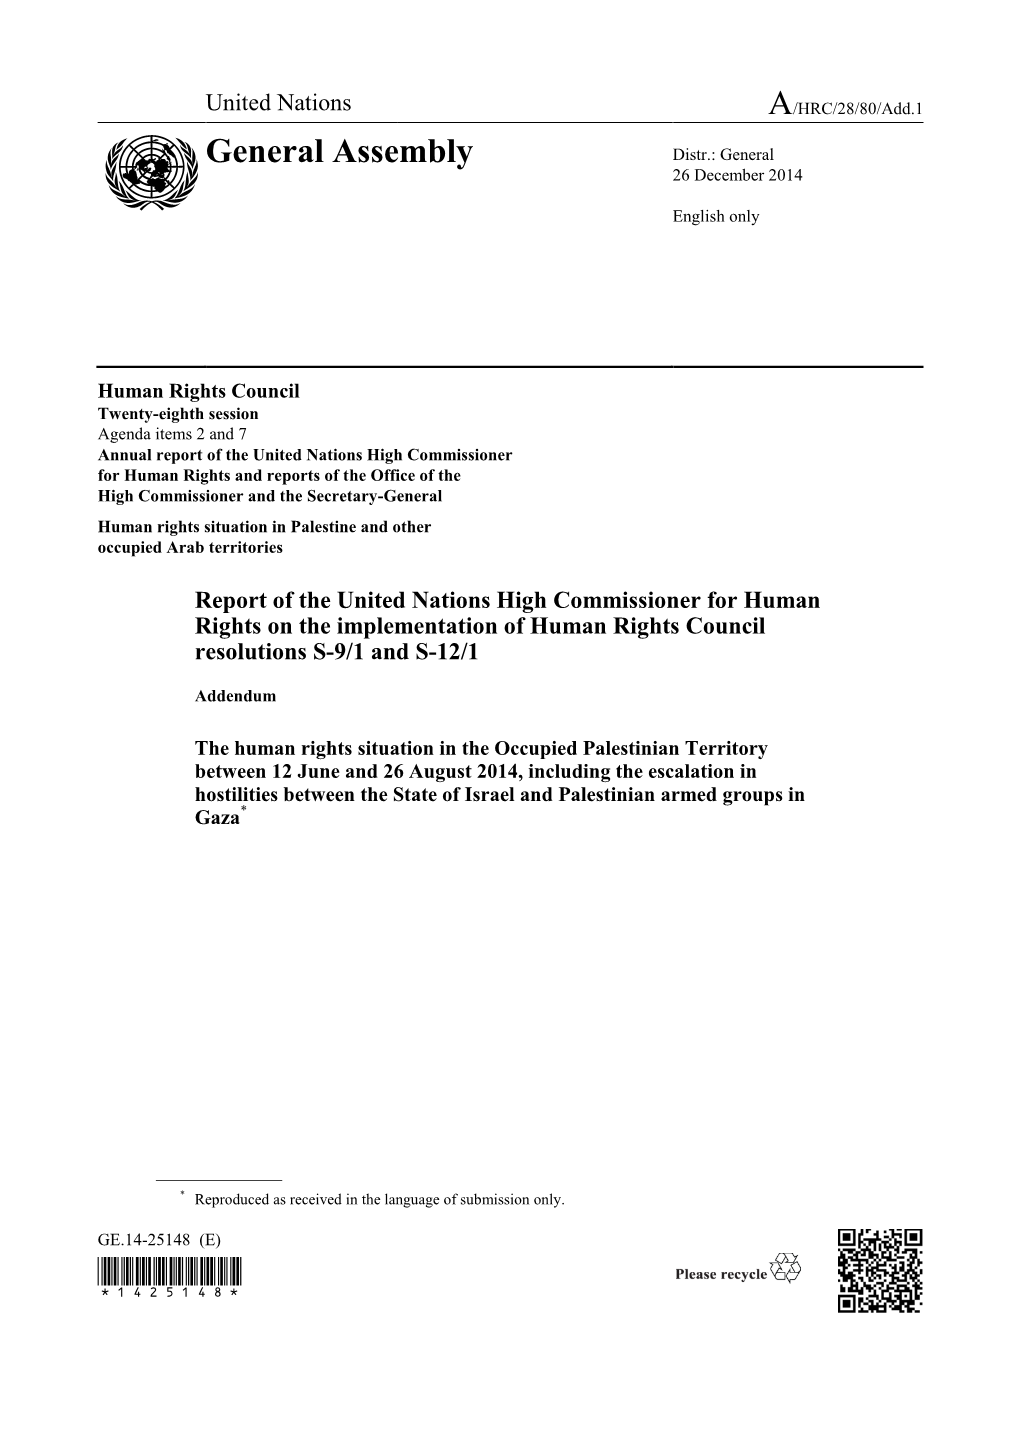 Page 1 GE.14-25148 (E) Human Rights Council Twenty-Eighth